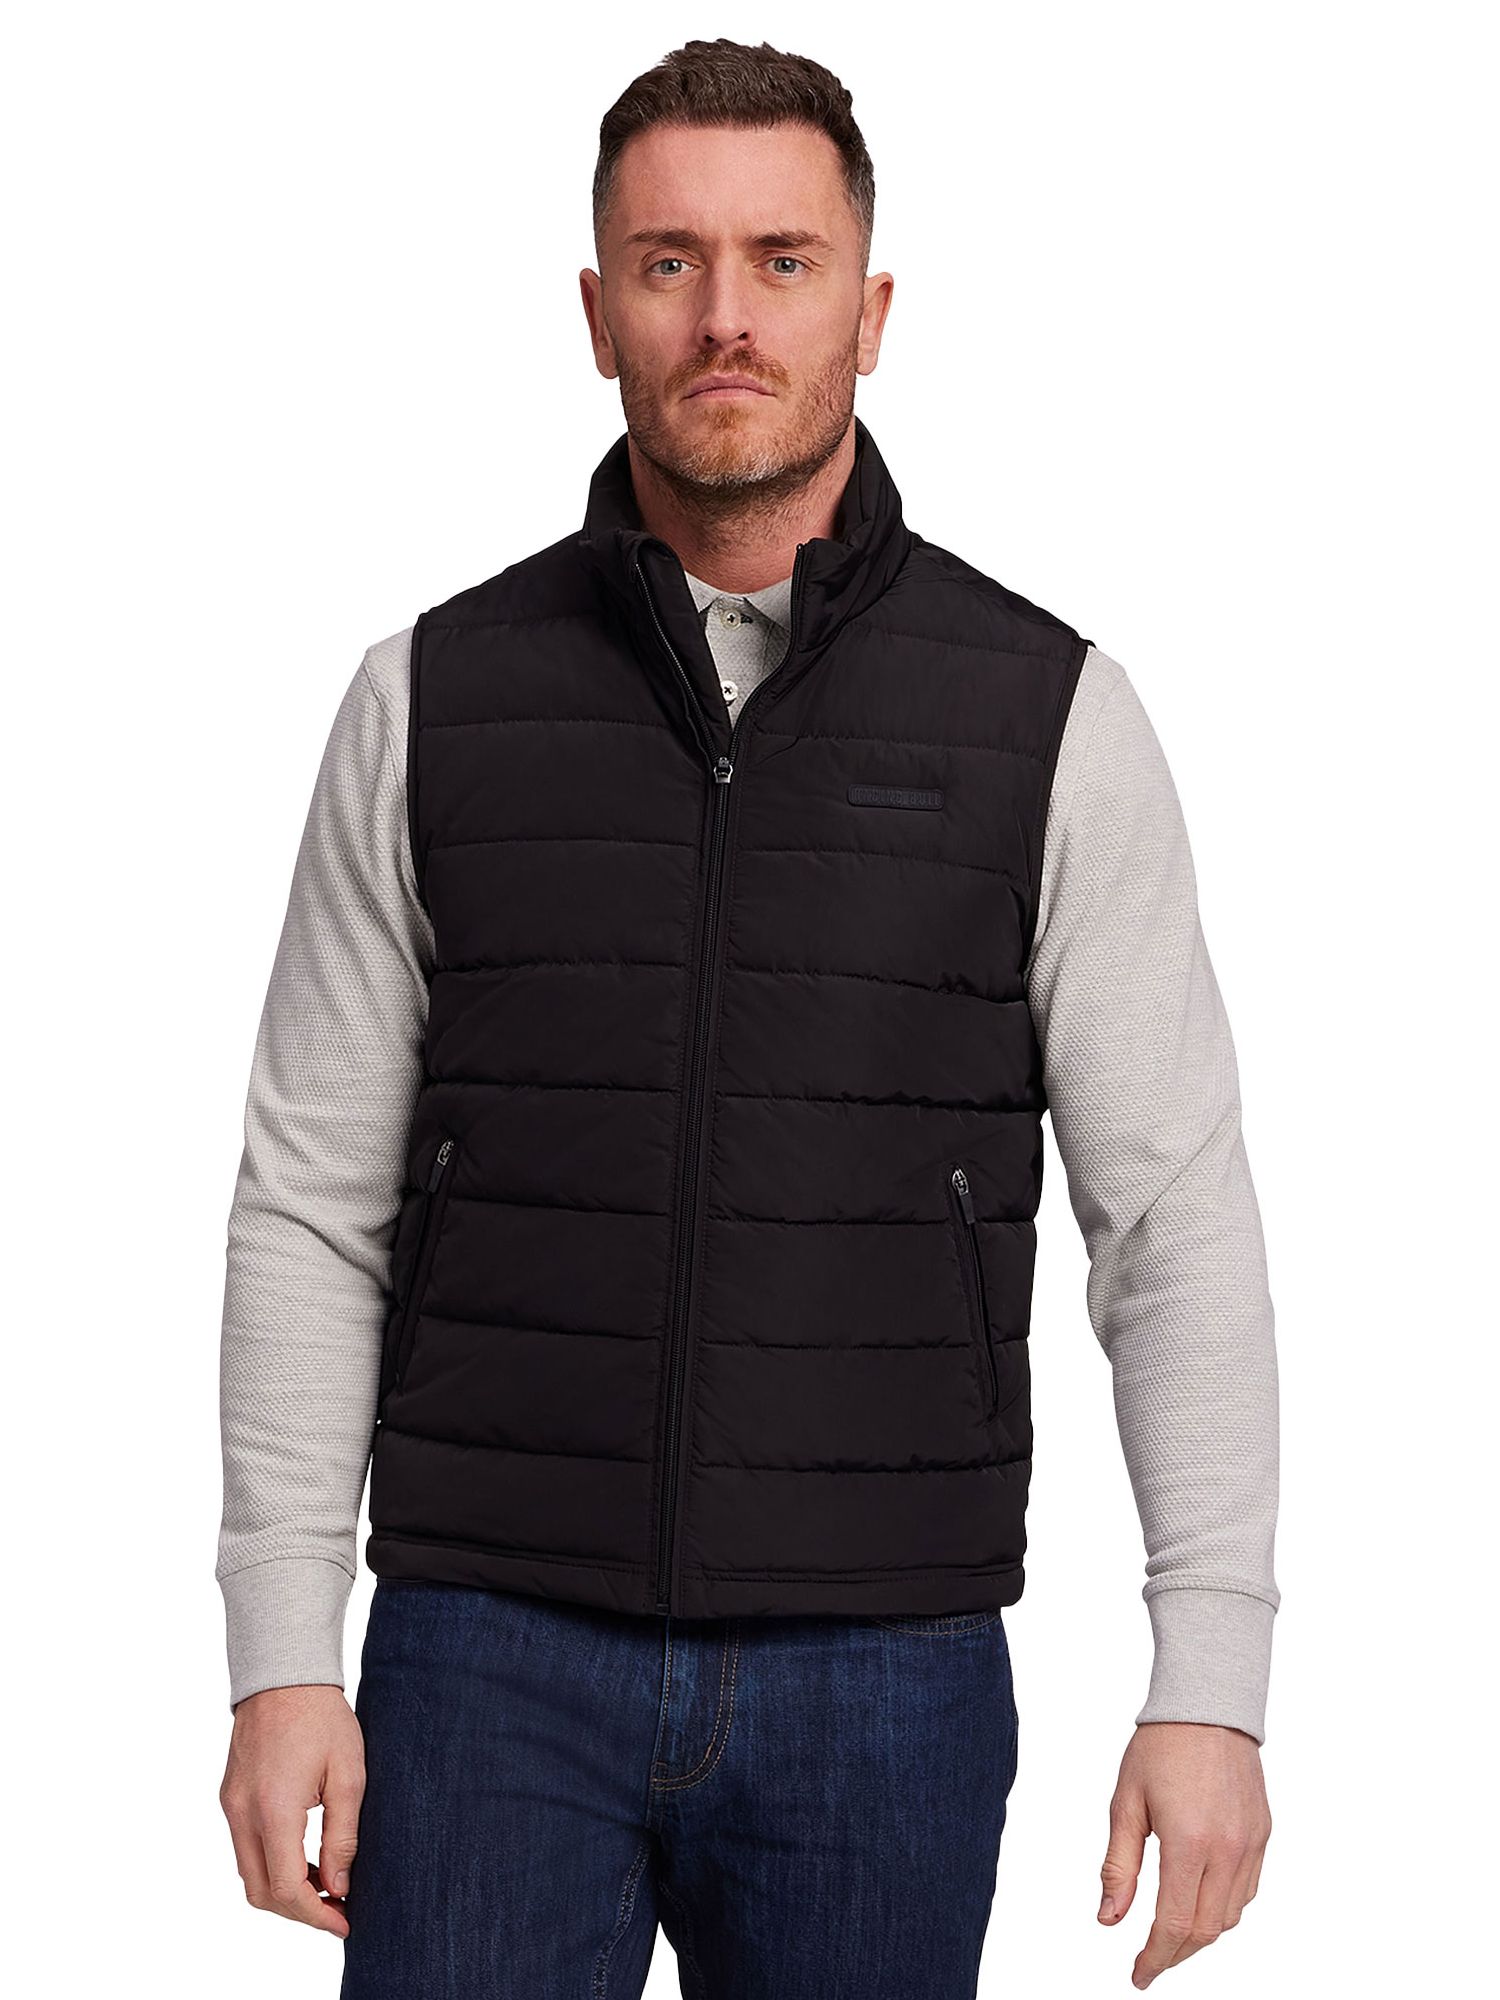 Raging Bull Midweight Quilted Gilet, Black at John Lewis & Partners